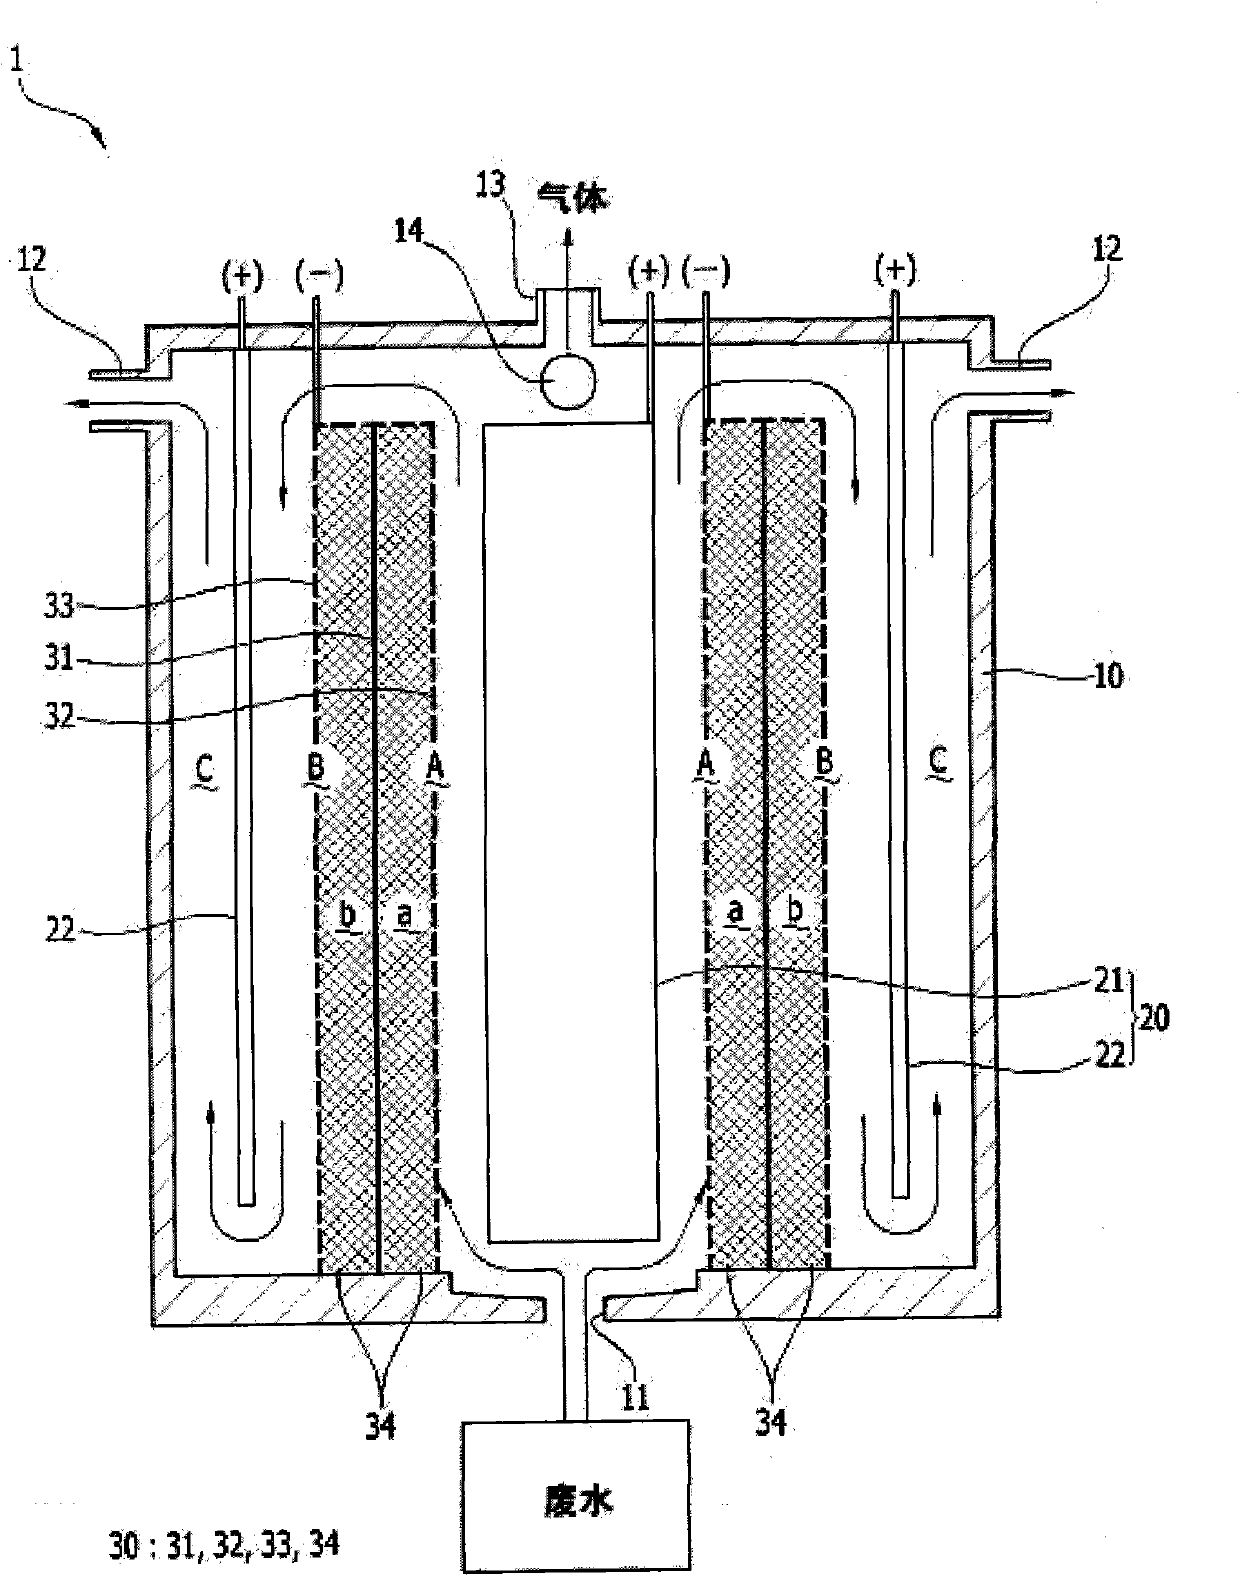 Electrolytic cell with large contact specific surface area for valuable metal recovery